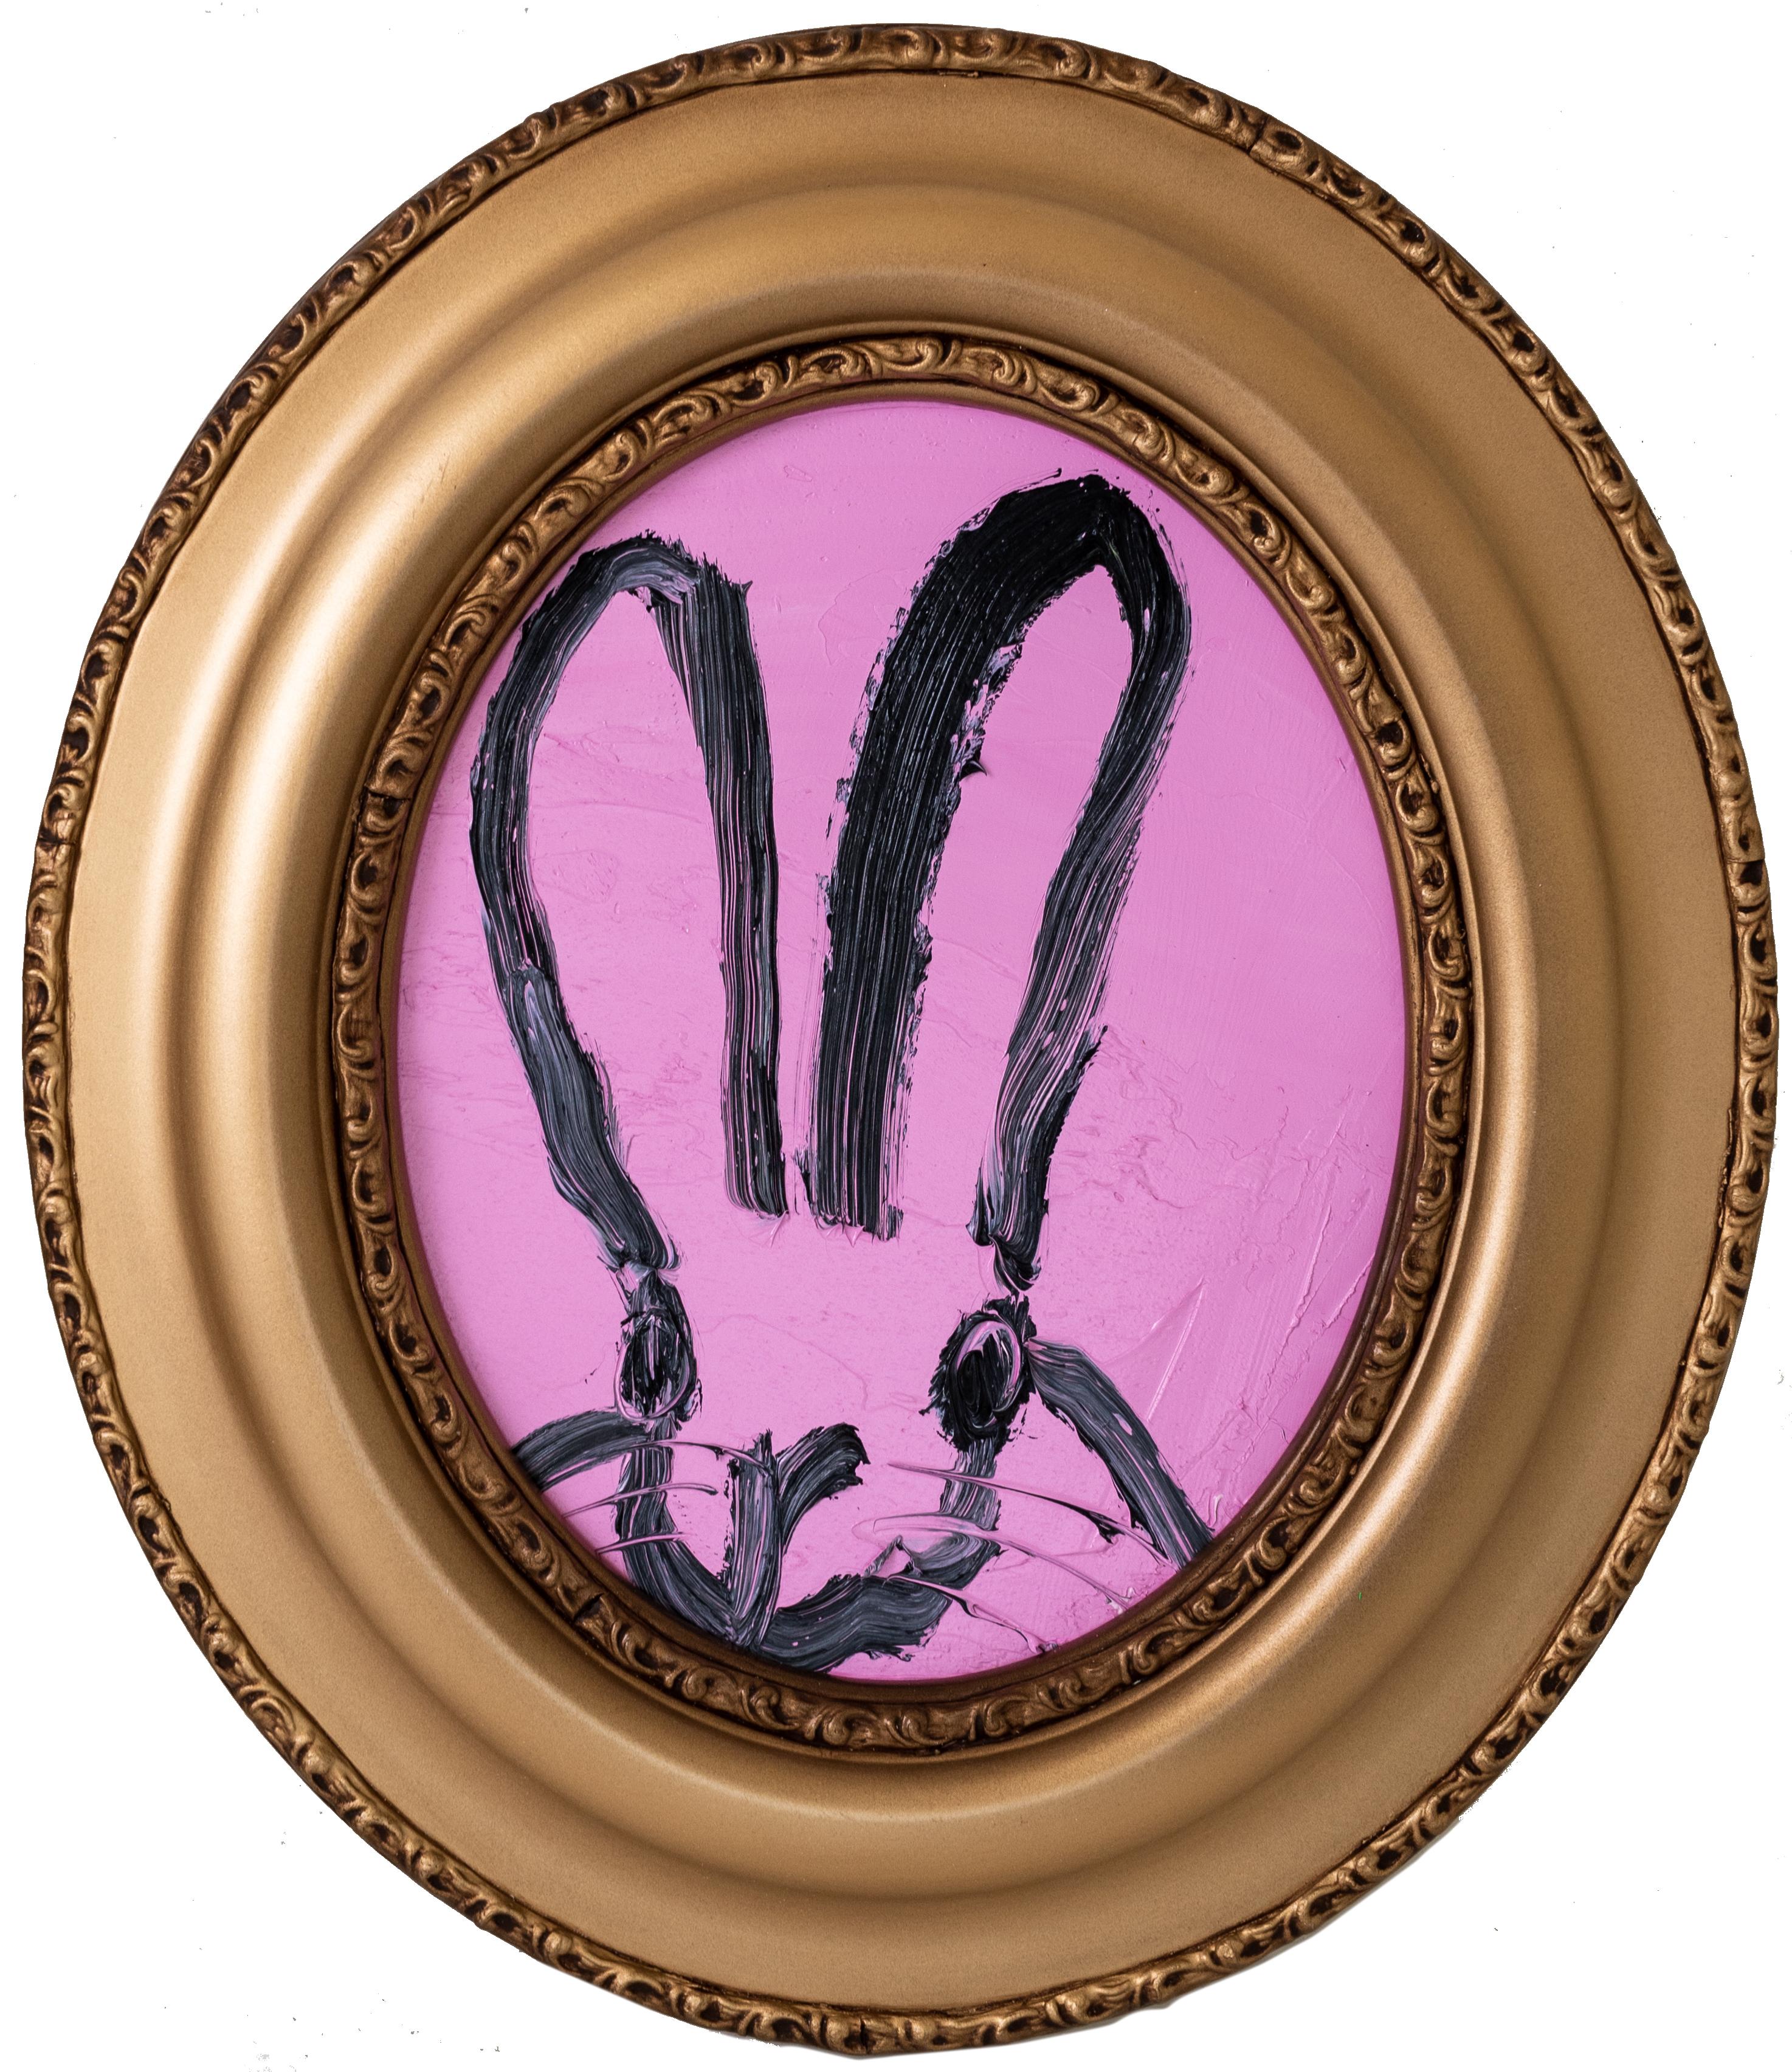 Hunt Slonem "Merlin" Pink Oval Bunny
Black gestured bunny on a pink background in an antique oval frame

Unframed: 10 x 8 inches  
Framed: 15 x 13 inches
*Painting is framed - Please note that not all Hunt Slonem frames are not in mint condition.